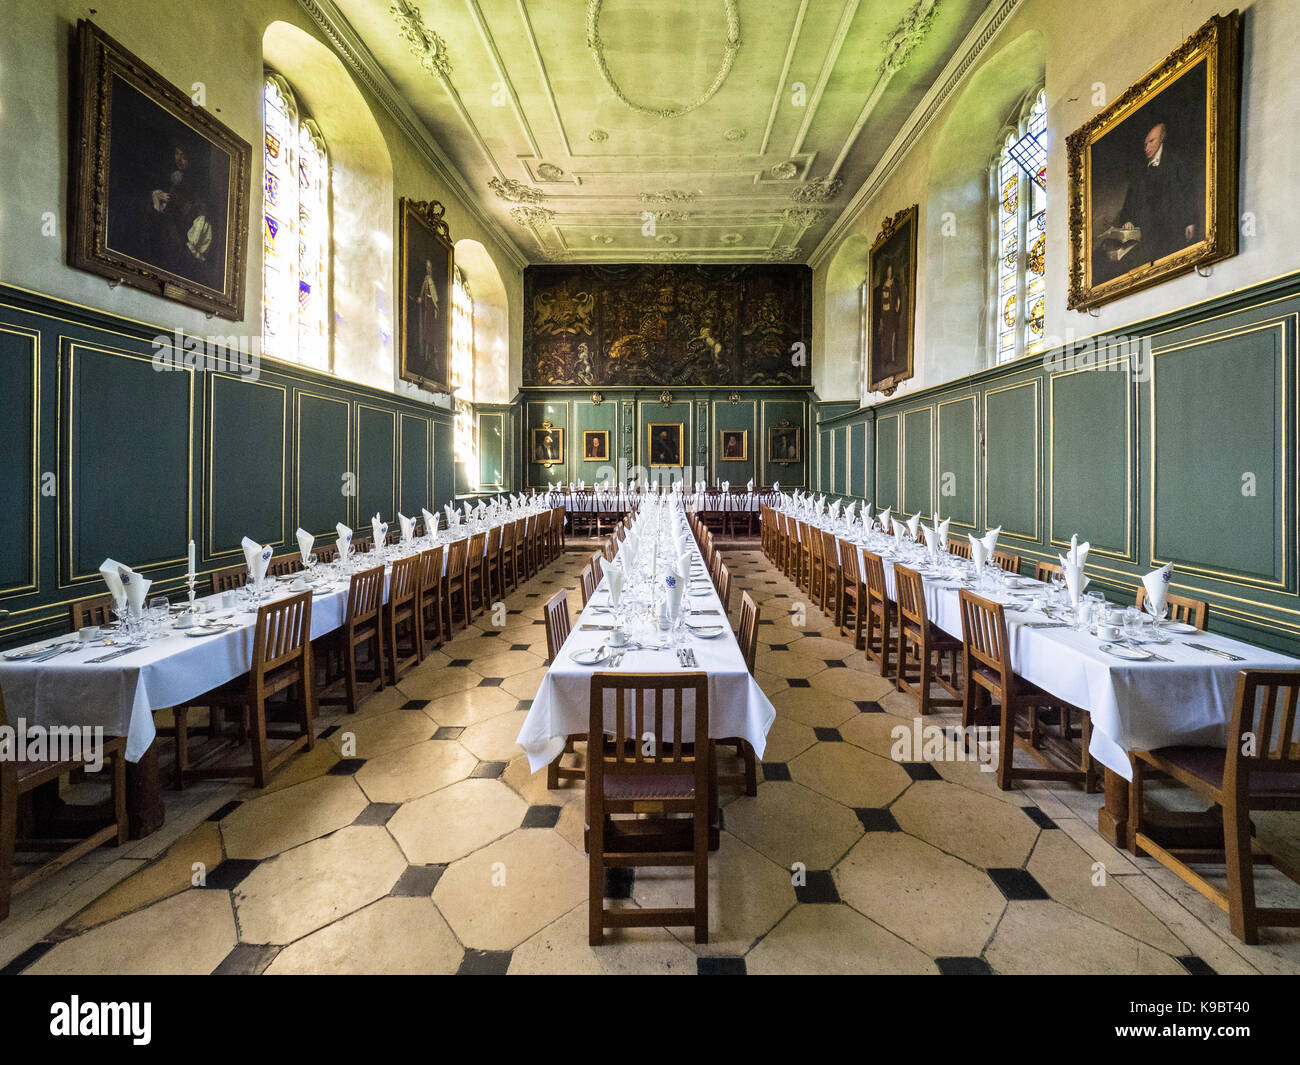 Magdalene College Cambridge Dining Room, Magdalene College is part of the University of Cambridge and was founded in 1428 & renamed Magdalene in 1542 Stock Photo